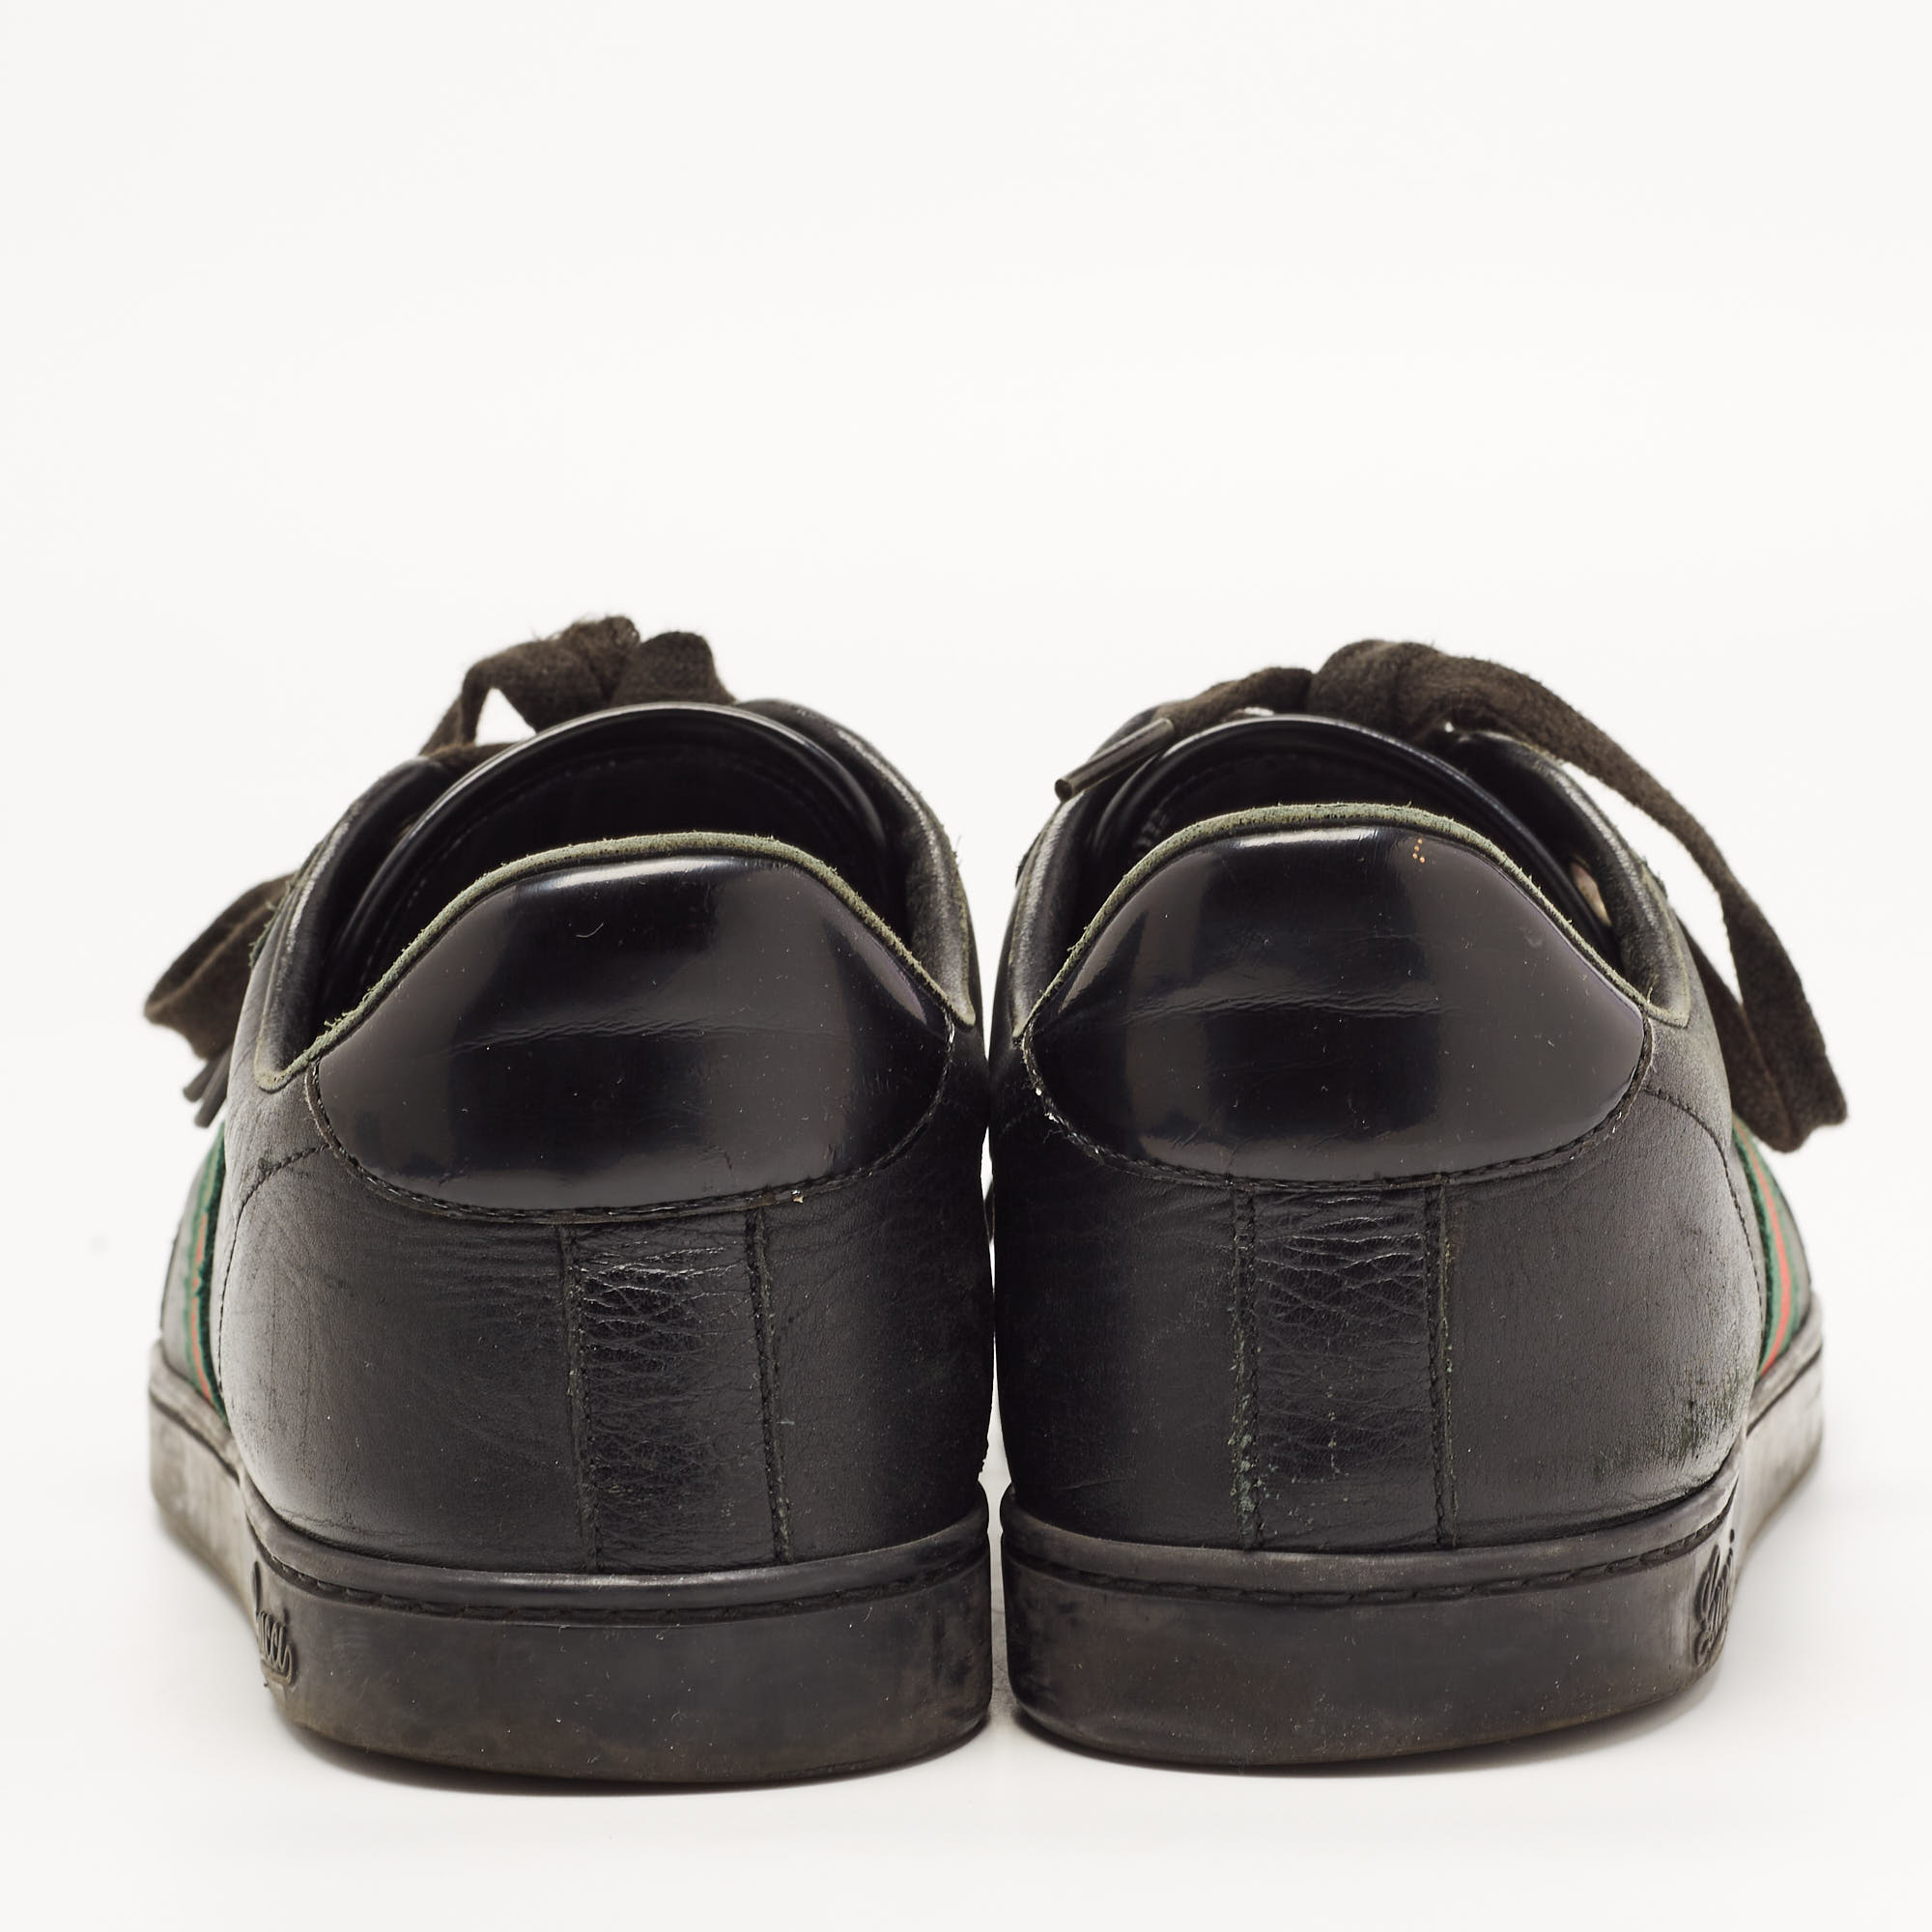 Gucci Black Leather Low Top Sneakers Size 41